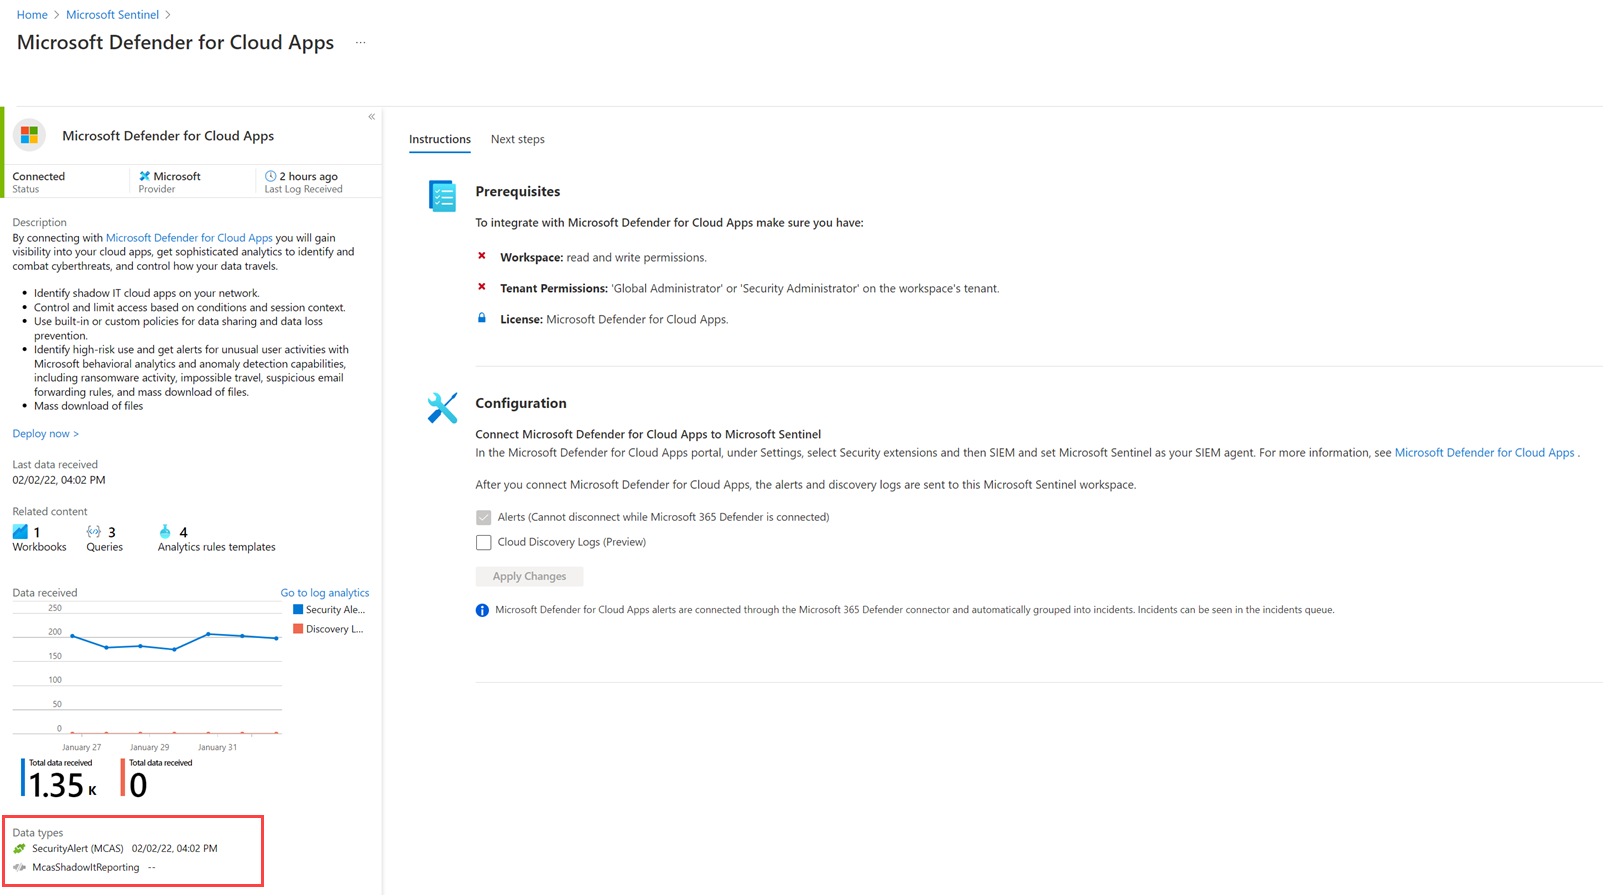 Screenshot of the Data connector page for Defender for Cloud Apps, with the free security alerts selected and the paid M C A S Shadow I T Reporting not selected.